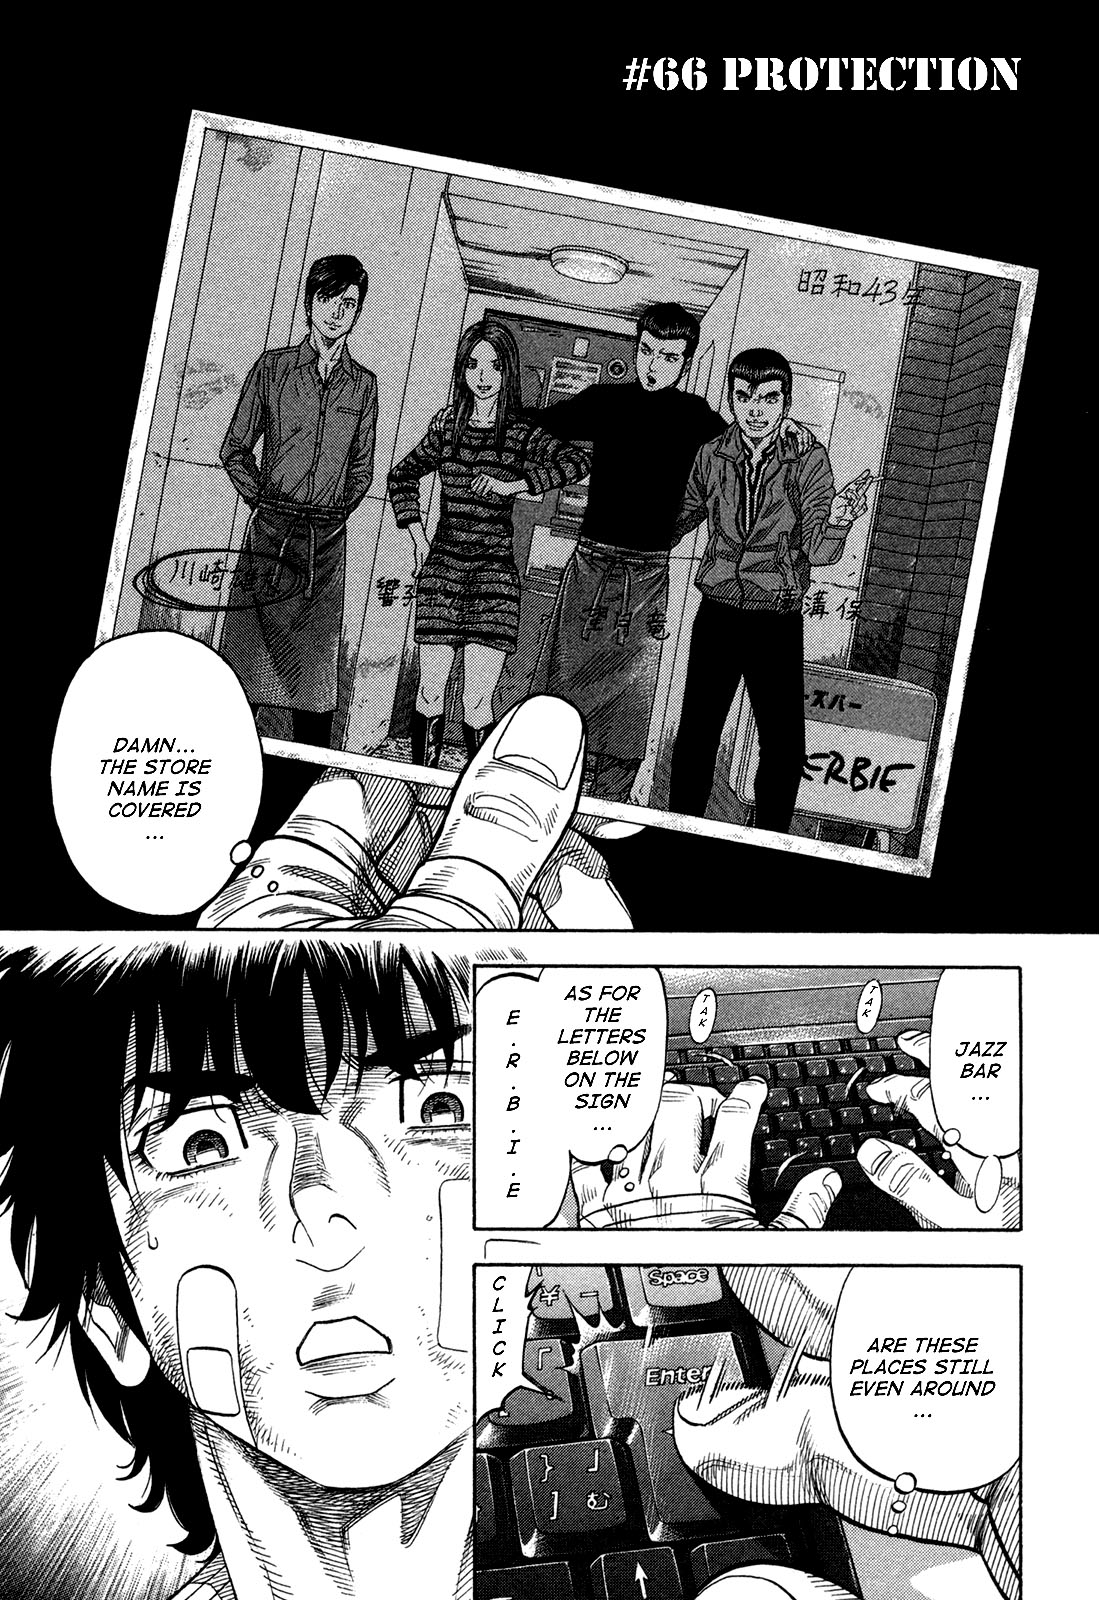 Montage Vol. 7 Ch. 66 Protection